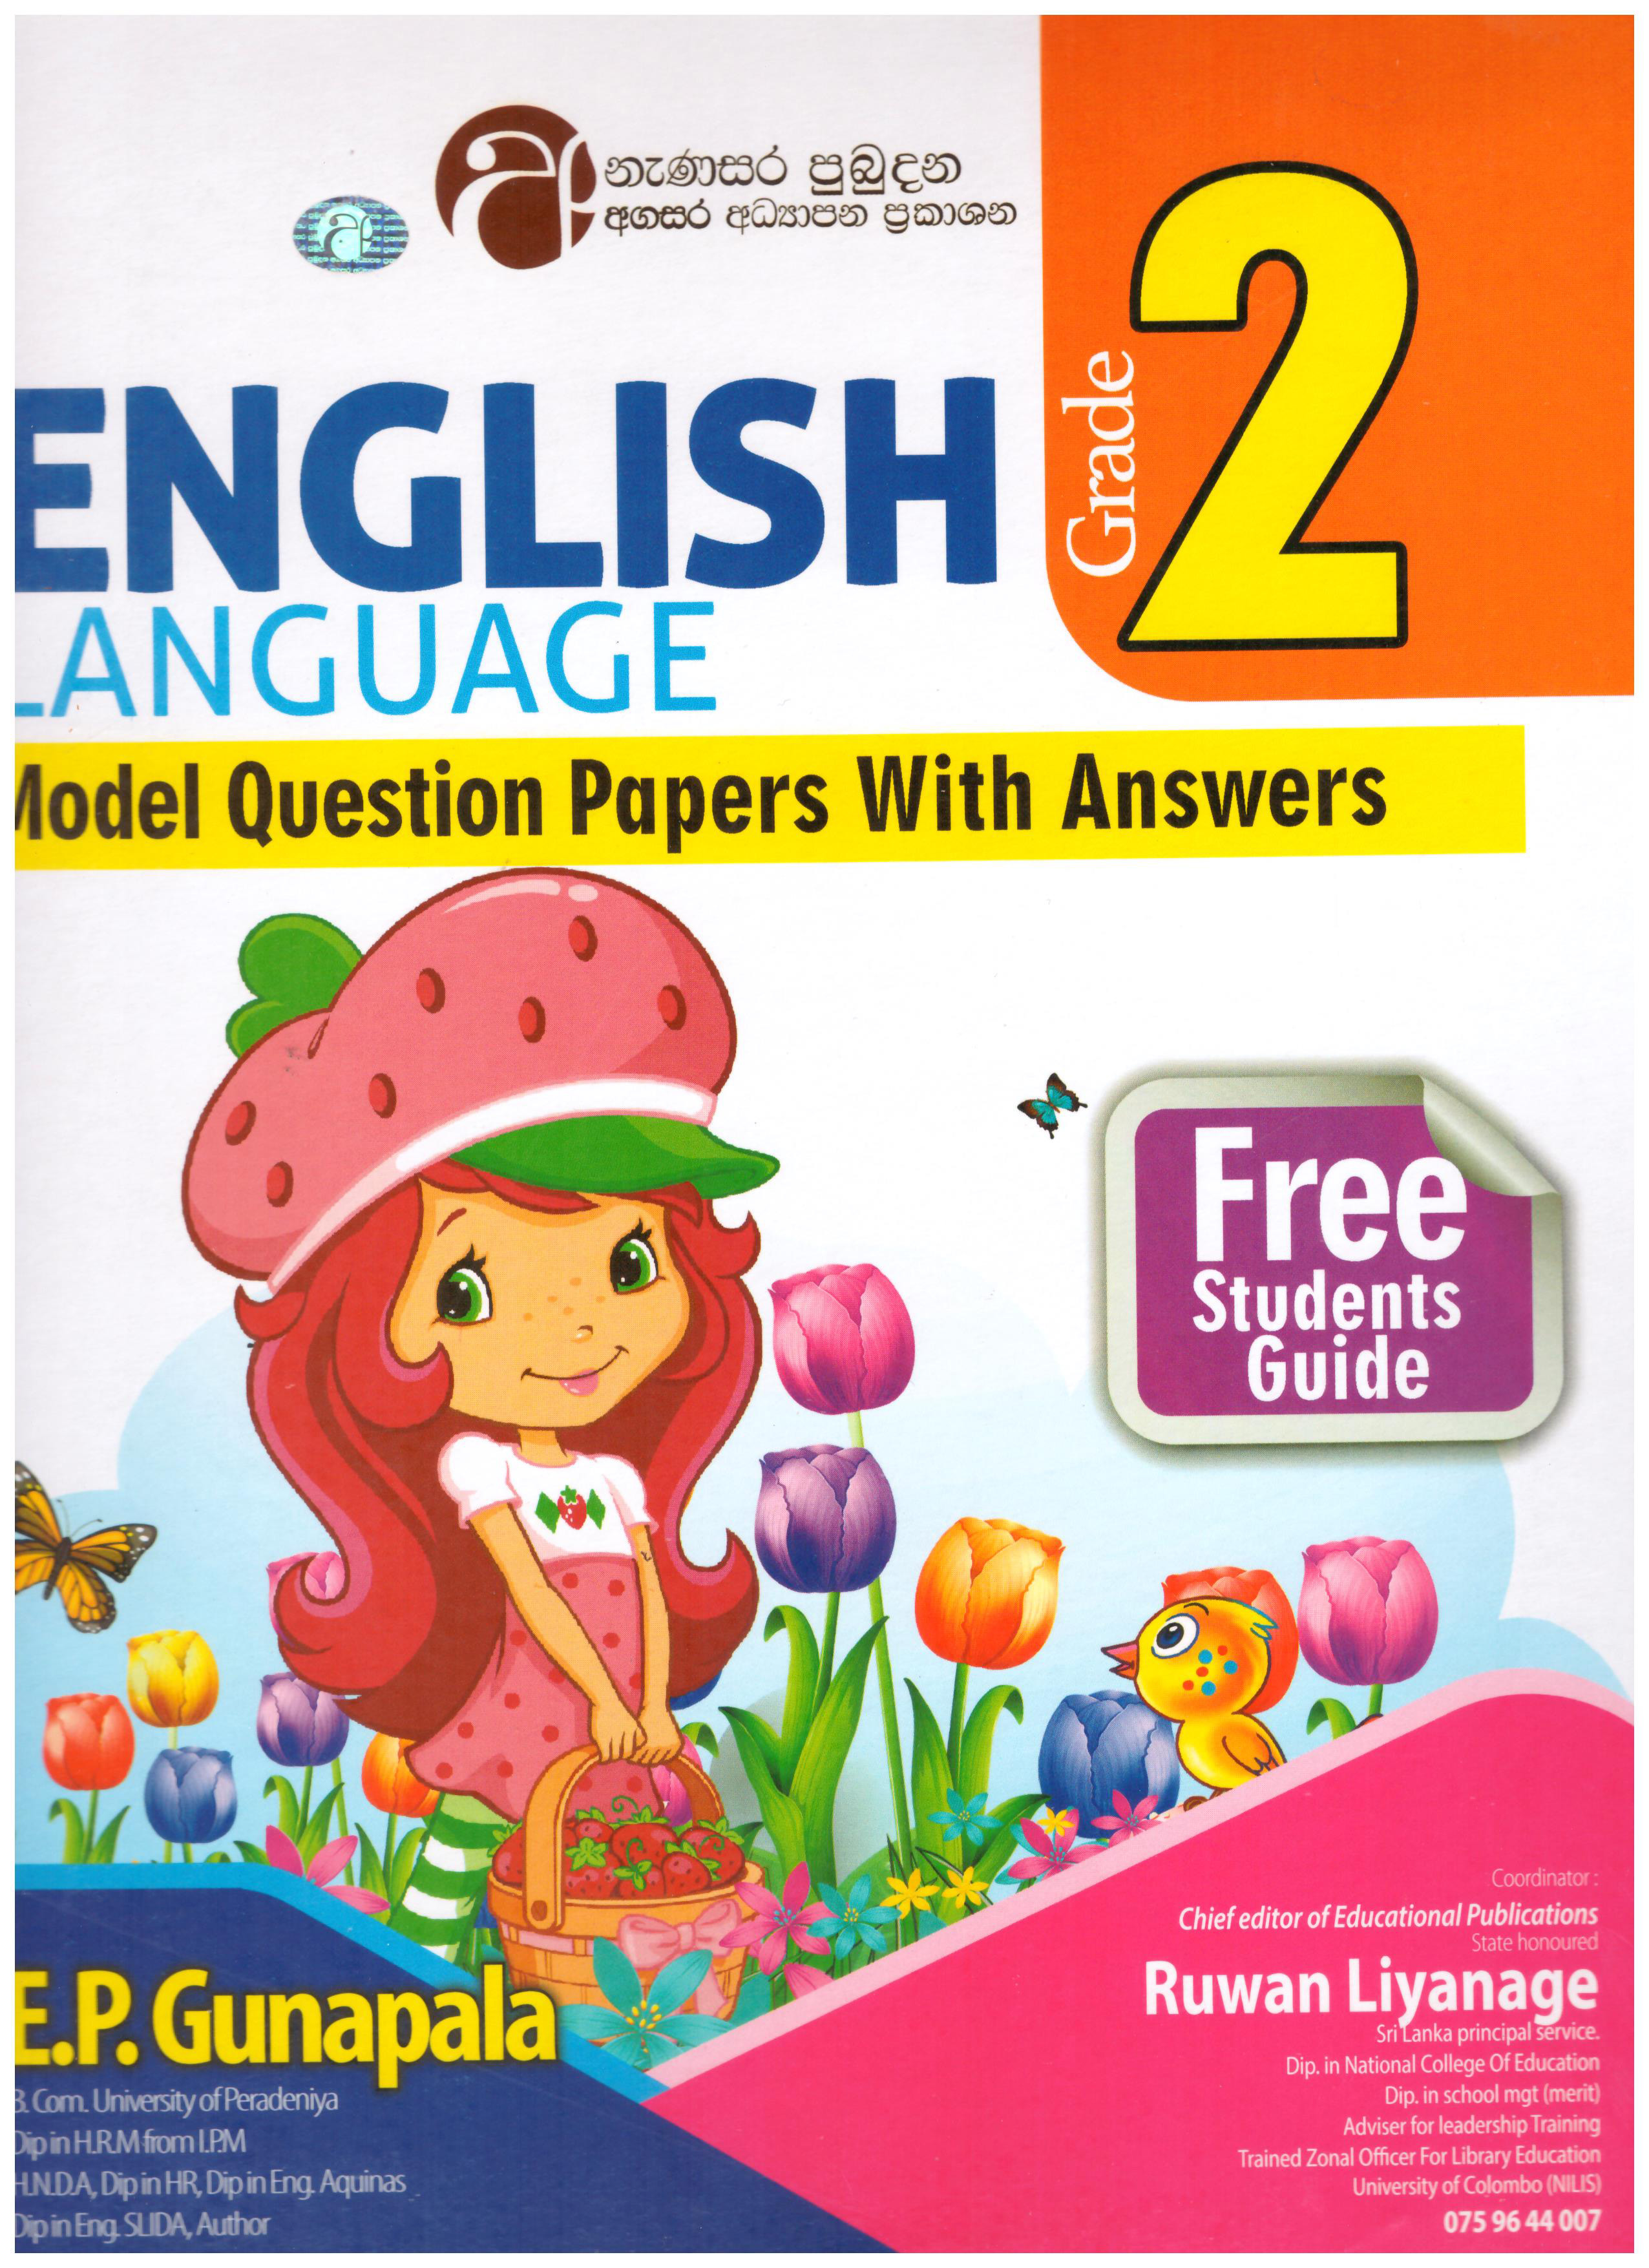 Grade 2 English Language Model Question Papers with Answers